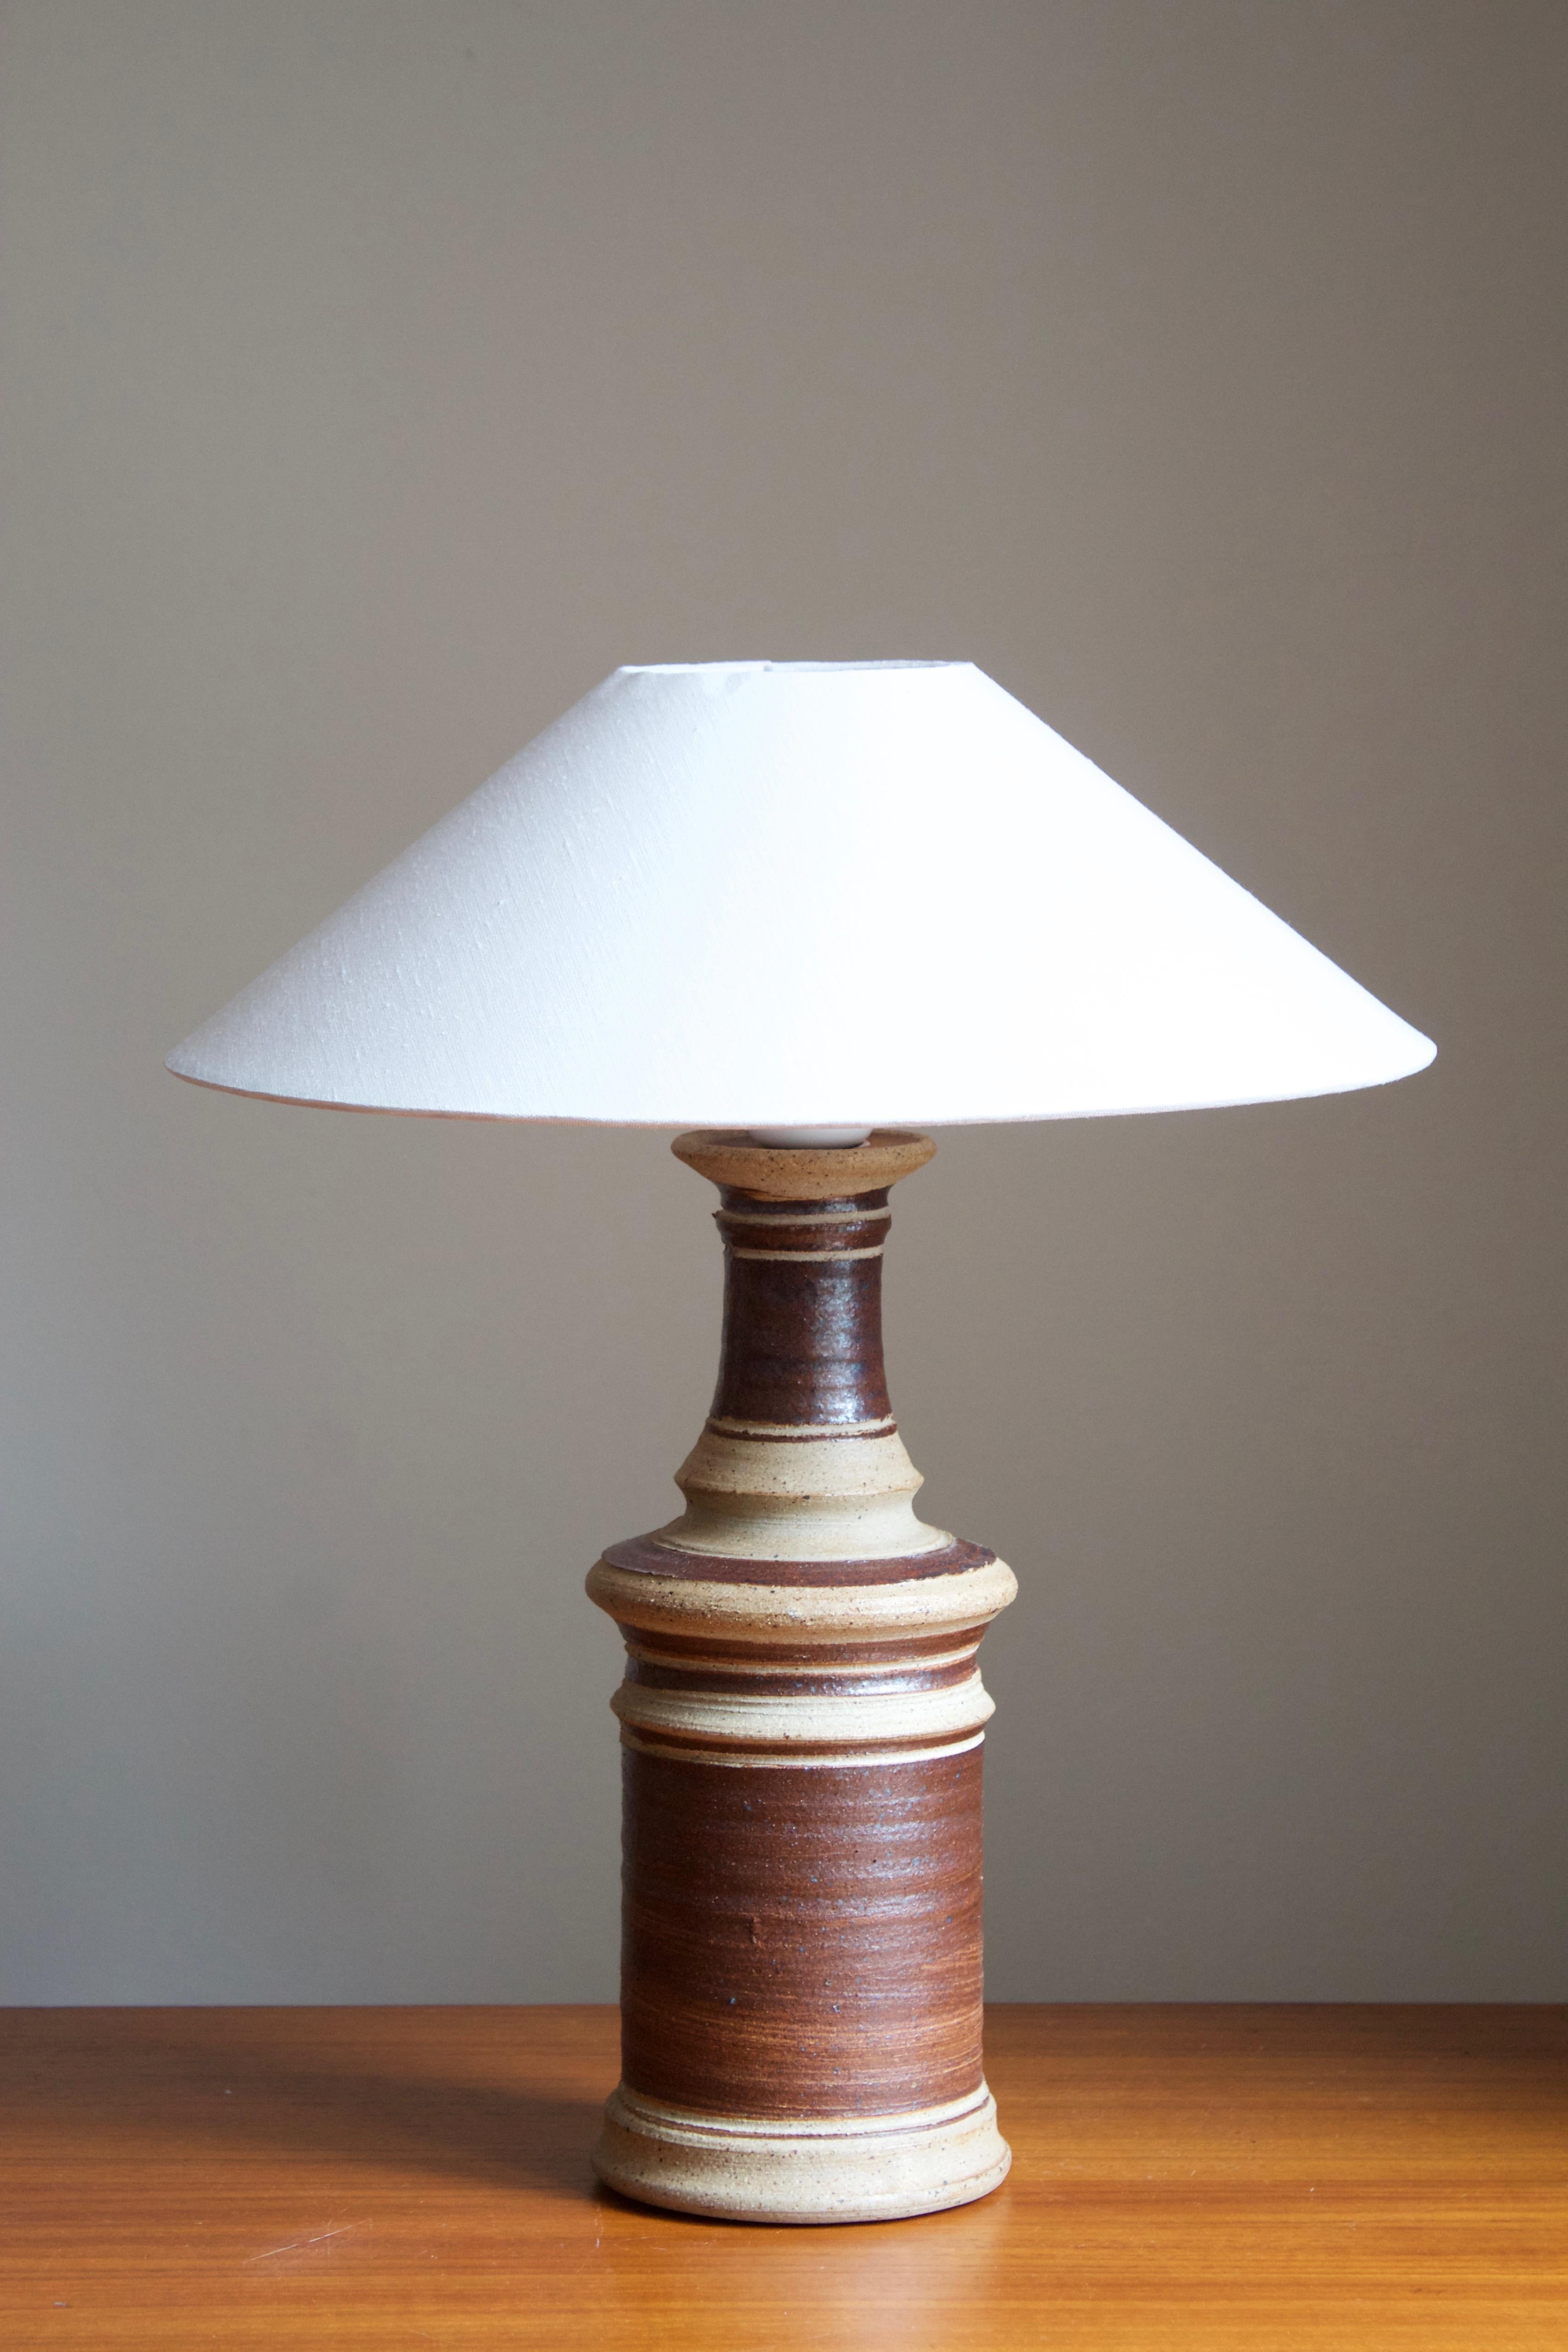 A sizable table lamp. Produced and designed by Tue Poulsen, Denmark, 1960s. Underside of base stamped.

Sold without lampshade. Stated dimensions exclude lampshade. 

Glaze features brown-grey colors.

Other designers of the period include Axel